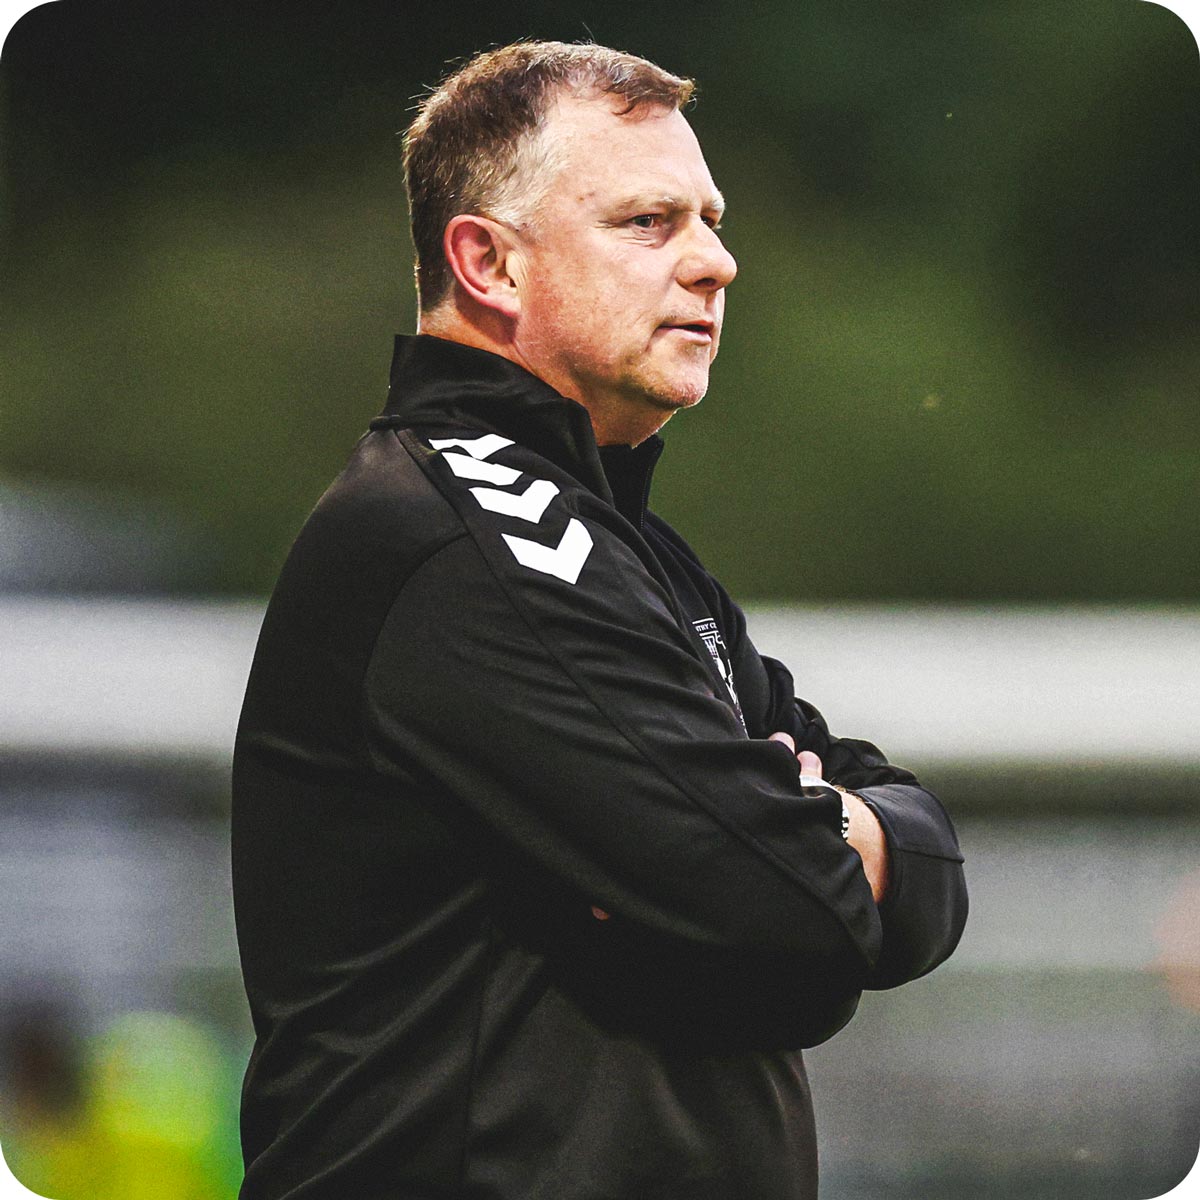 Photograph of the Coventry City Manager, Mark Robins.